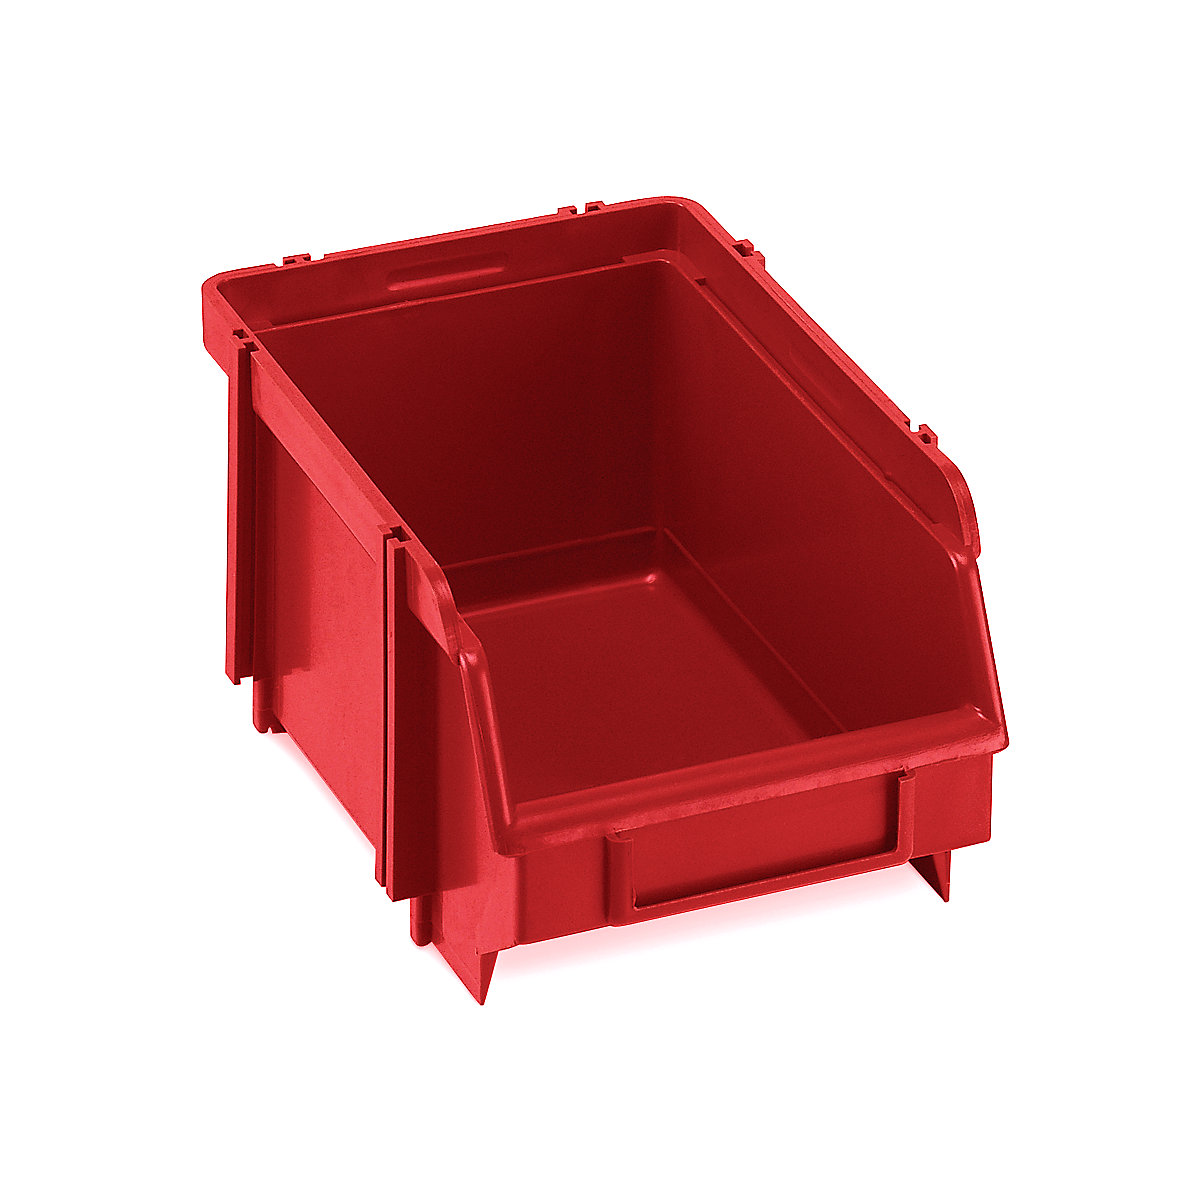 Open fronted storage bin, self-supporting